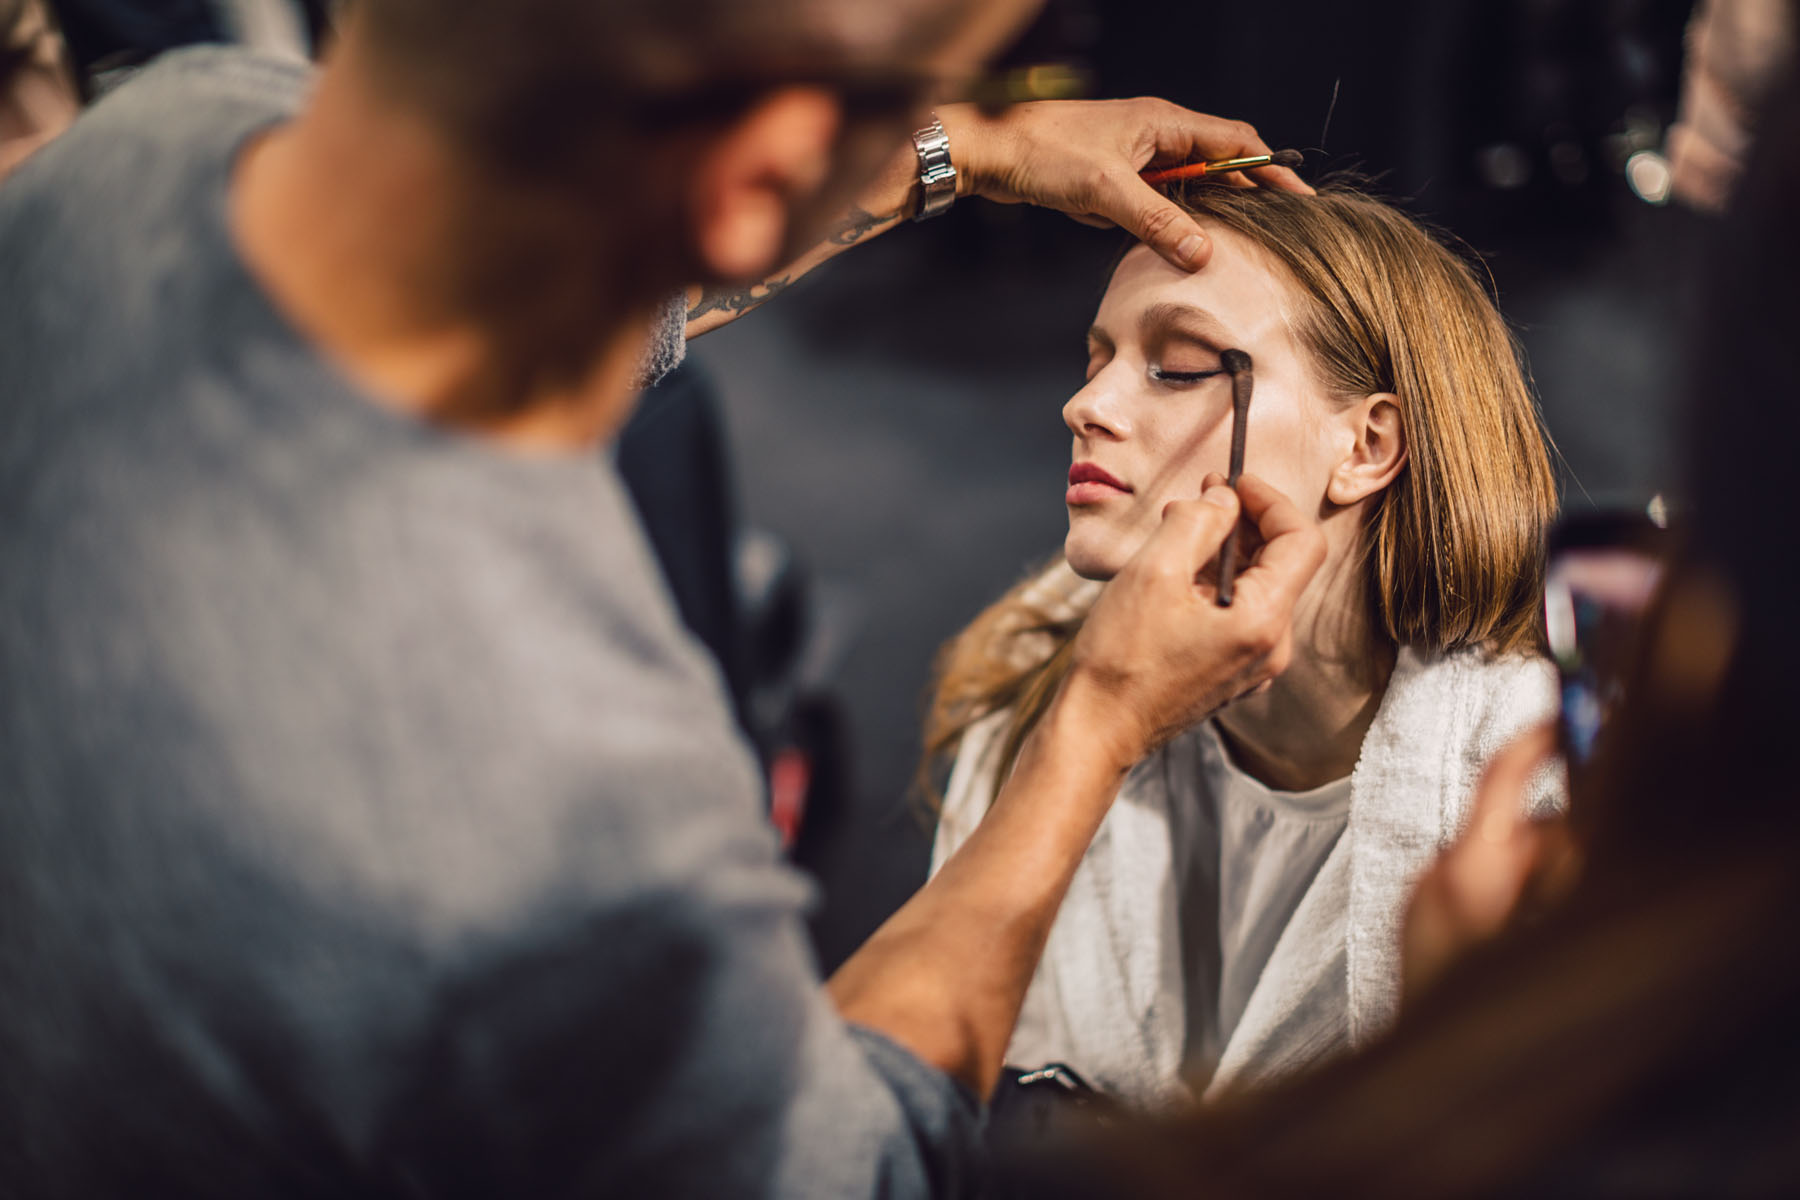 MFW Recap 2 - Backstage with Maybelline at Tommy Hilfiger // Notjessfashion.com